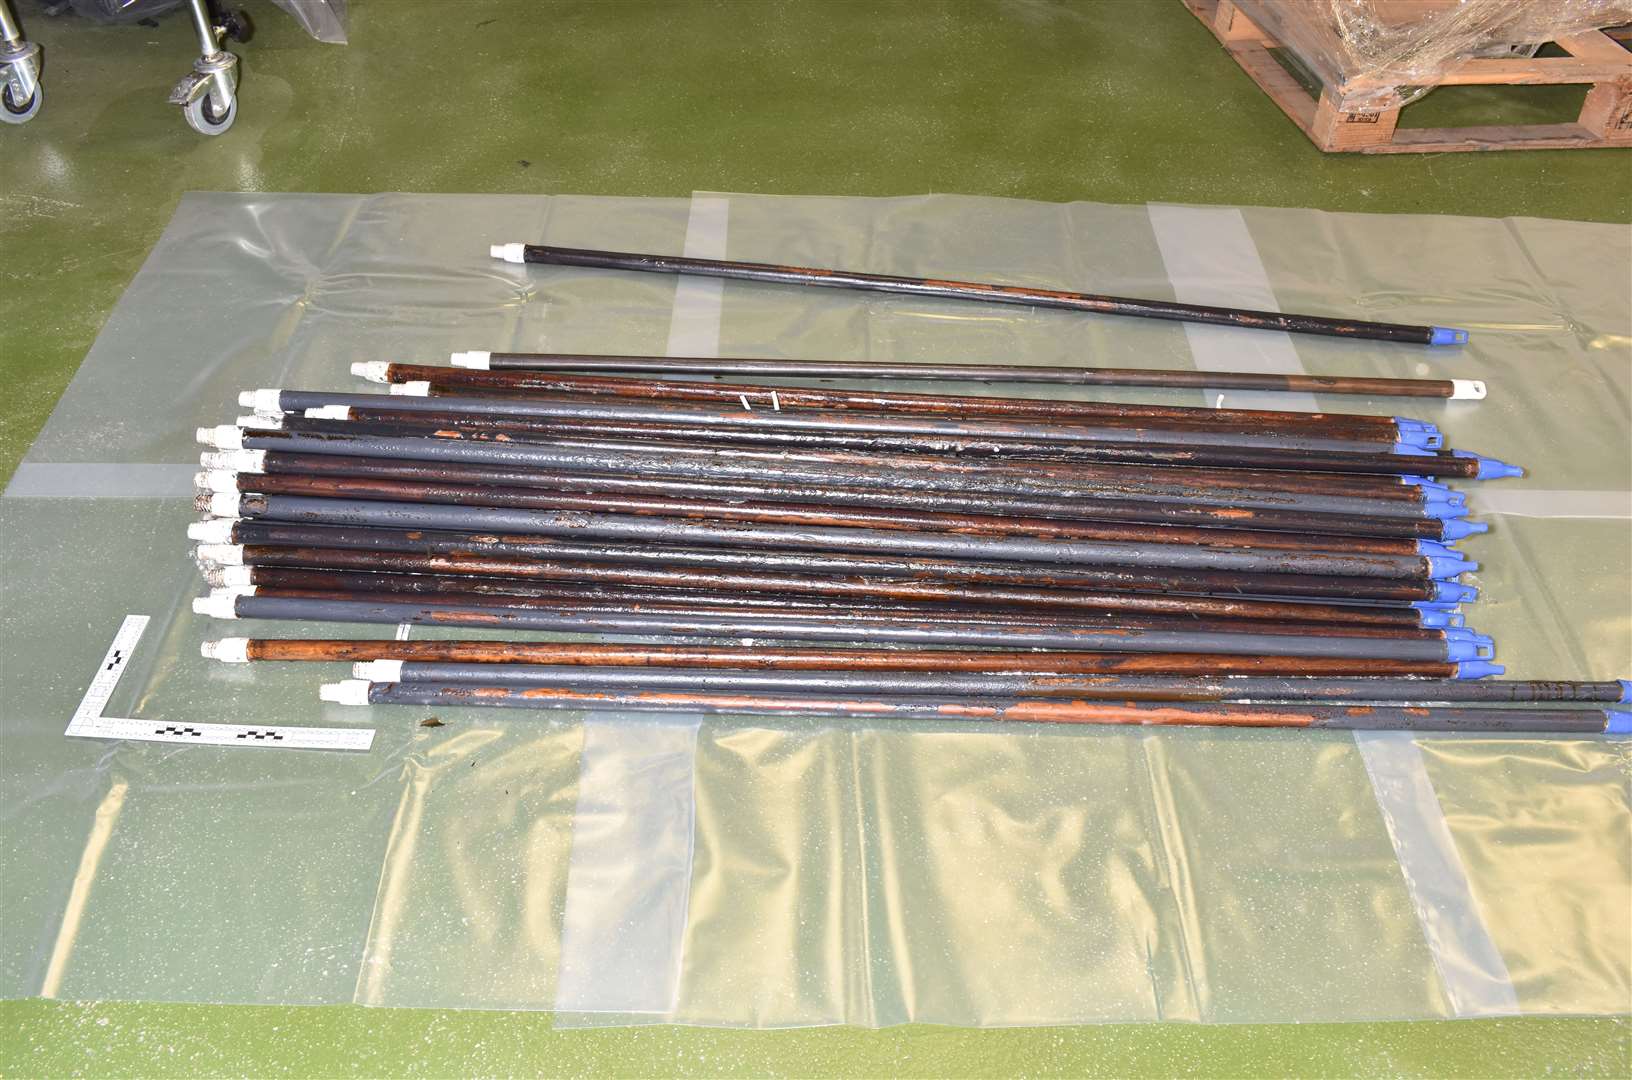 The broom handles were covered in a lacquer containing cocaine. Picture: Met Police